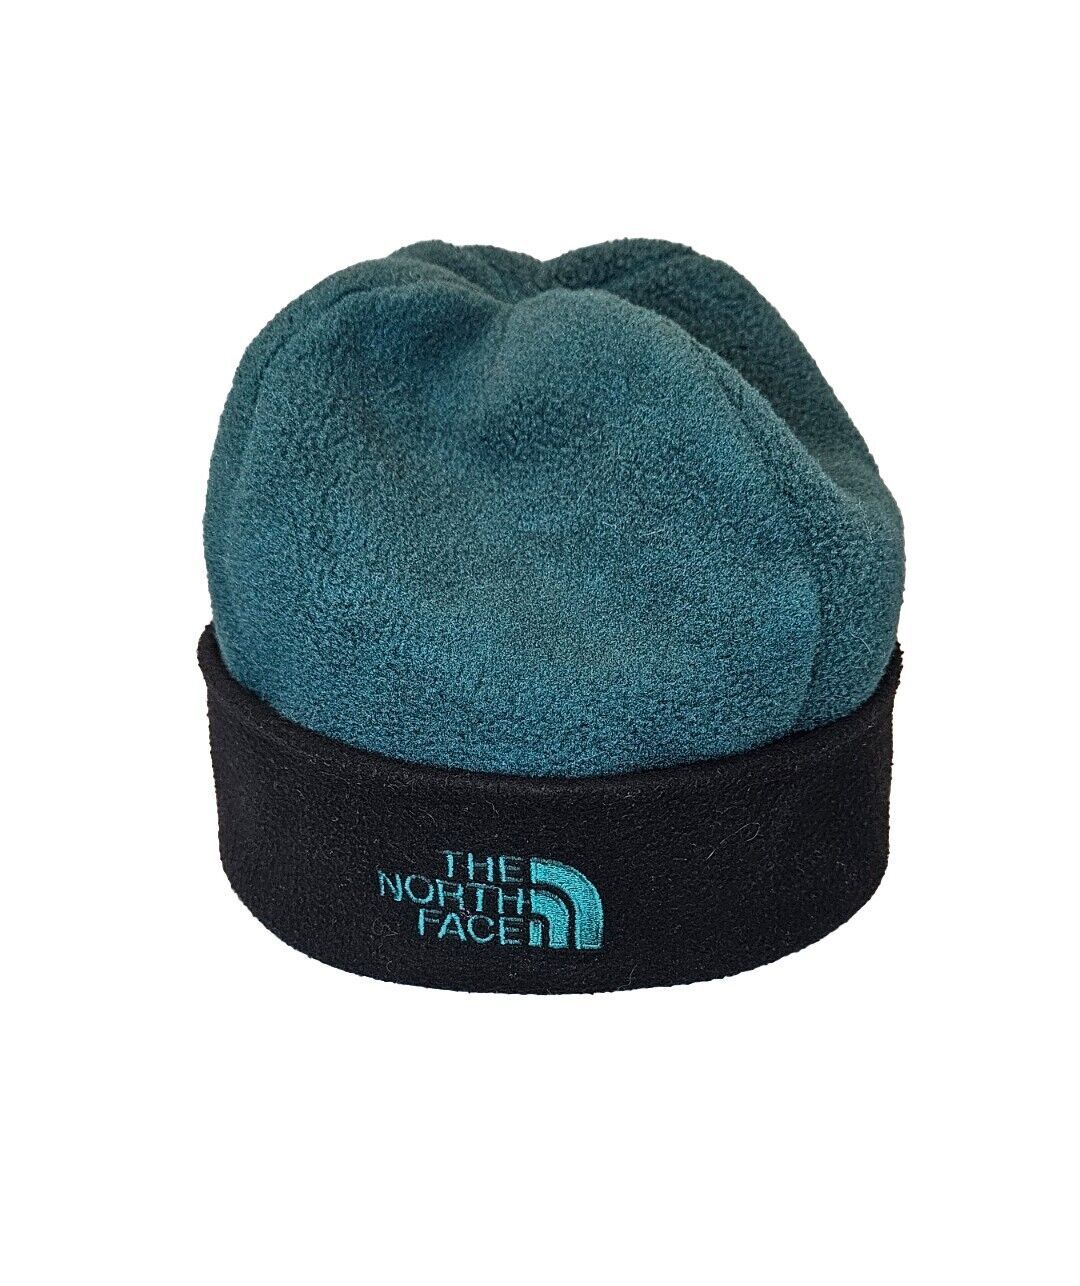 Primary image for Vtg The North Face Beanie Hat USA Made Black Green Fleece Winter Cap 90s Cuff